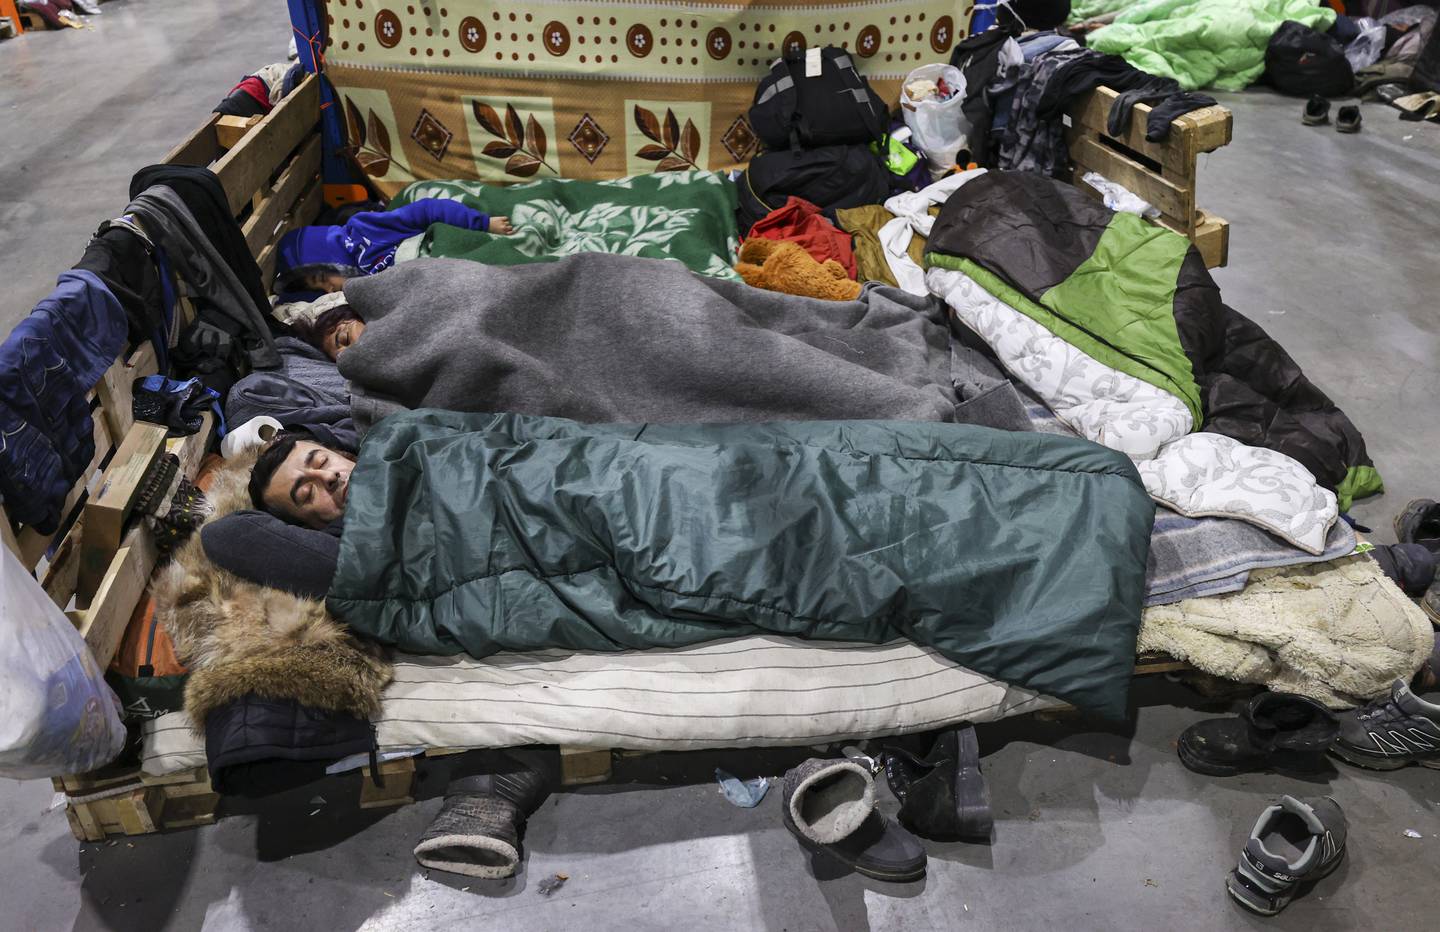 A family sleeps at the transport and logistics center near the Bruzgi checkpoint at the Belarusian-Polish border, in the Grodno region, Belarus, 24 November 2021.  Asylum-seekers, refugees and migrants from the Middle East arrived at the Belarusian-Polish checkpoint of Bruzgi-Kuznica aiming to cross the border.  Thousands of people who want to obtain asylum in the European Union have been trapped at low temperatures at the border since 08 November.   EPA / STRINGER